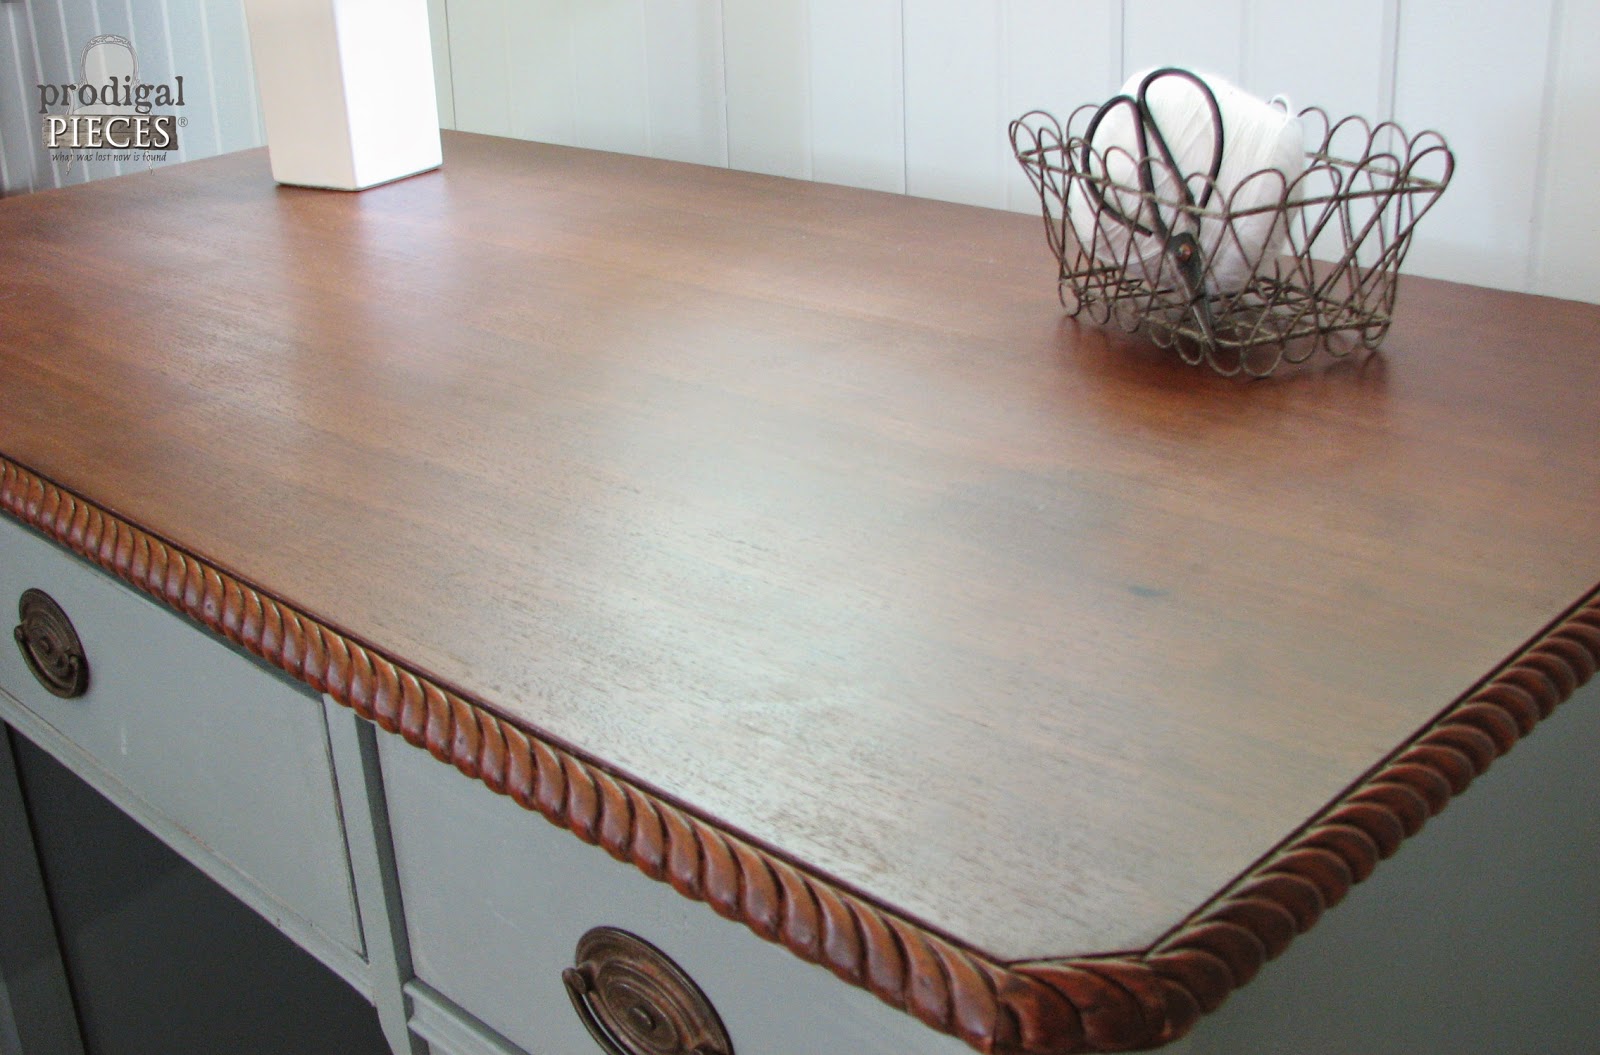 Refinished Desk Top from Antique Desk Makeover by Larissa of Prodigal Pieces | prodigalpieces.com #prodigalpieces